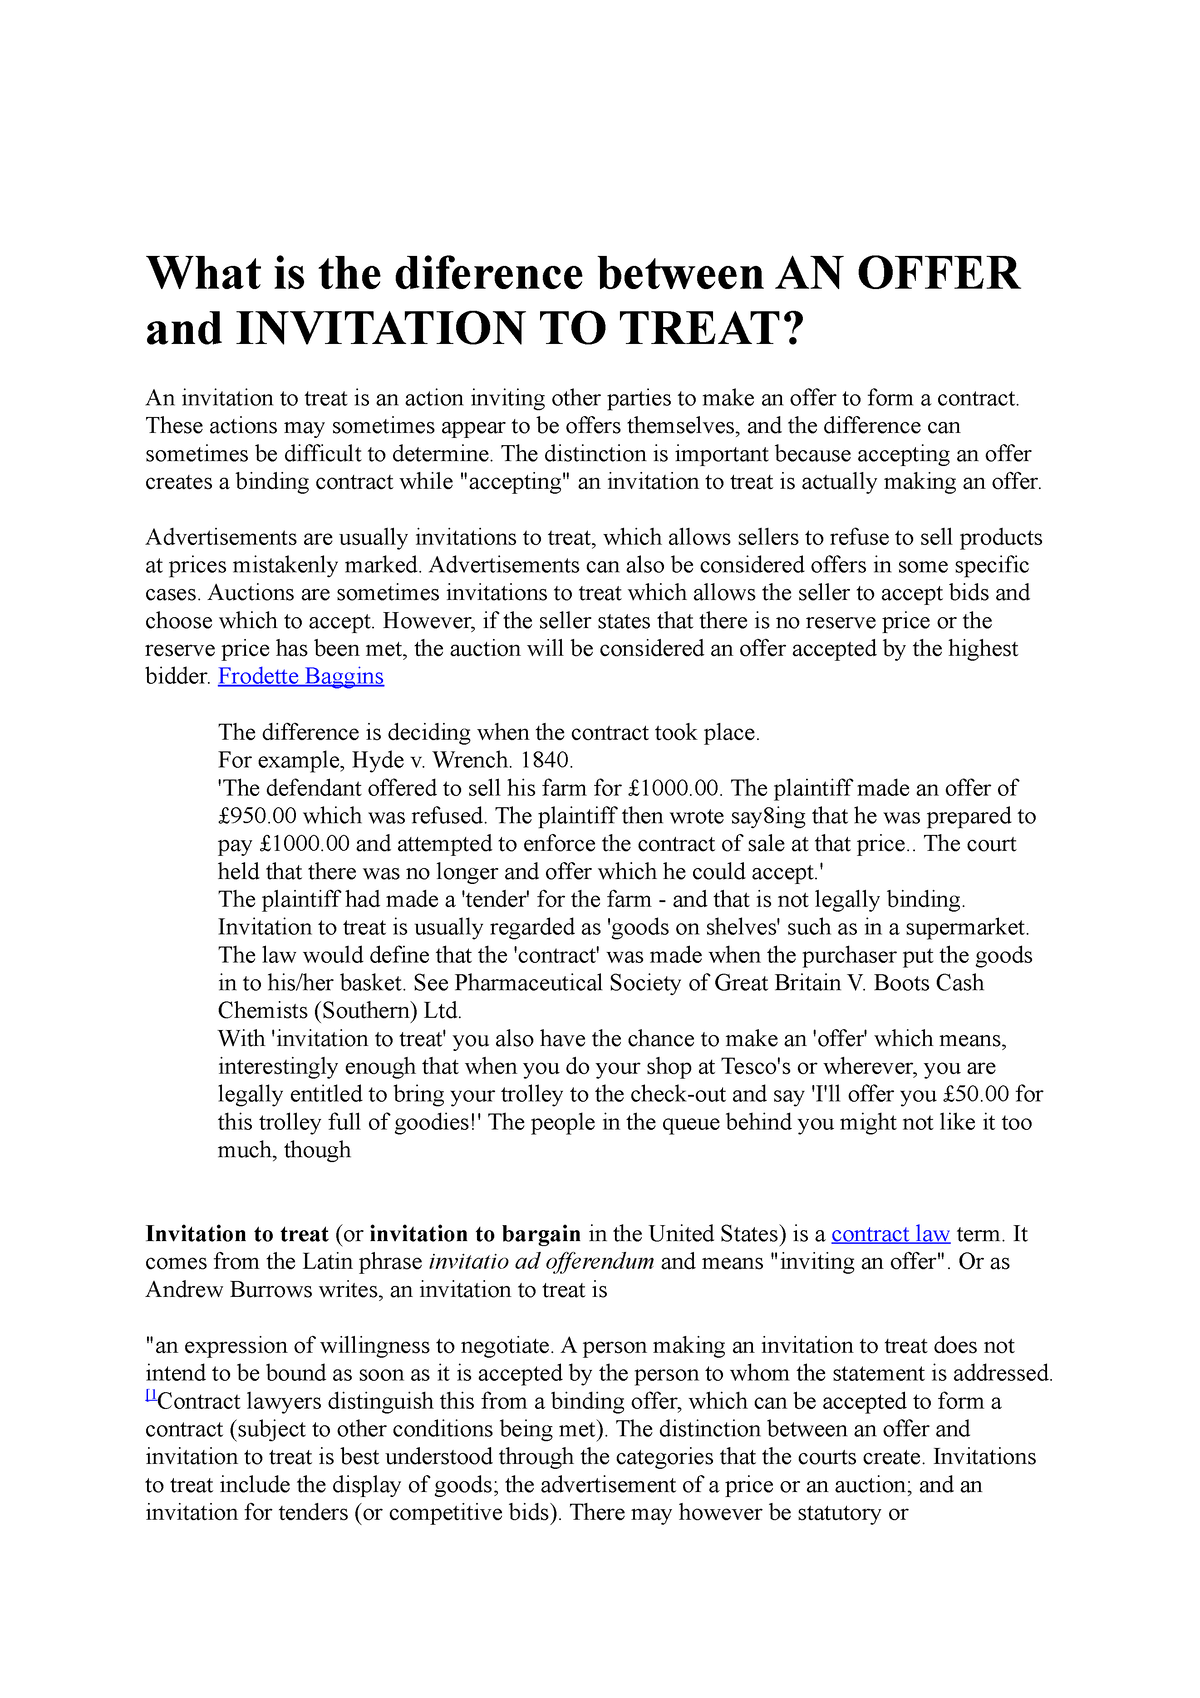 Difference Between Offer and Invitation to Treat - AdisonqoSnow